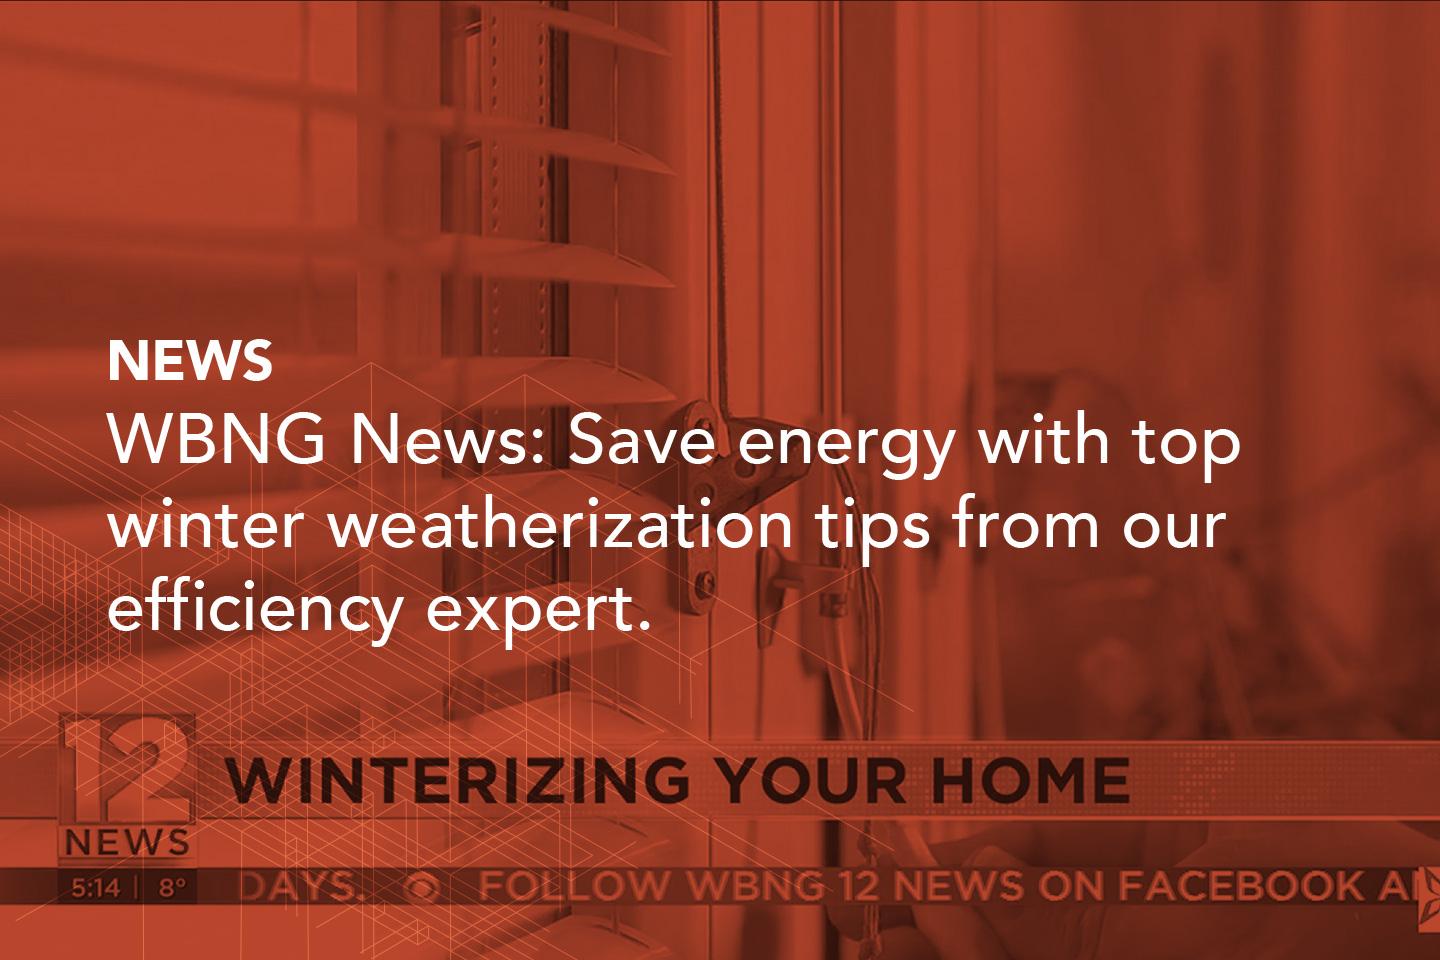 Save energy with top winter weatherization tips from our efficiency expert.